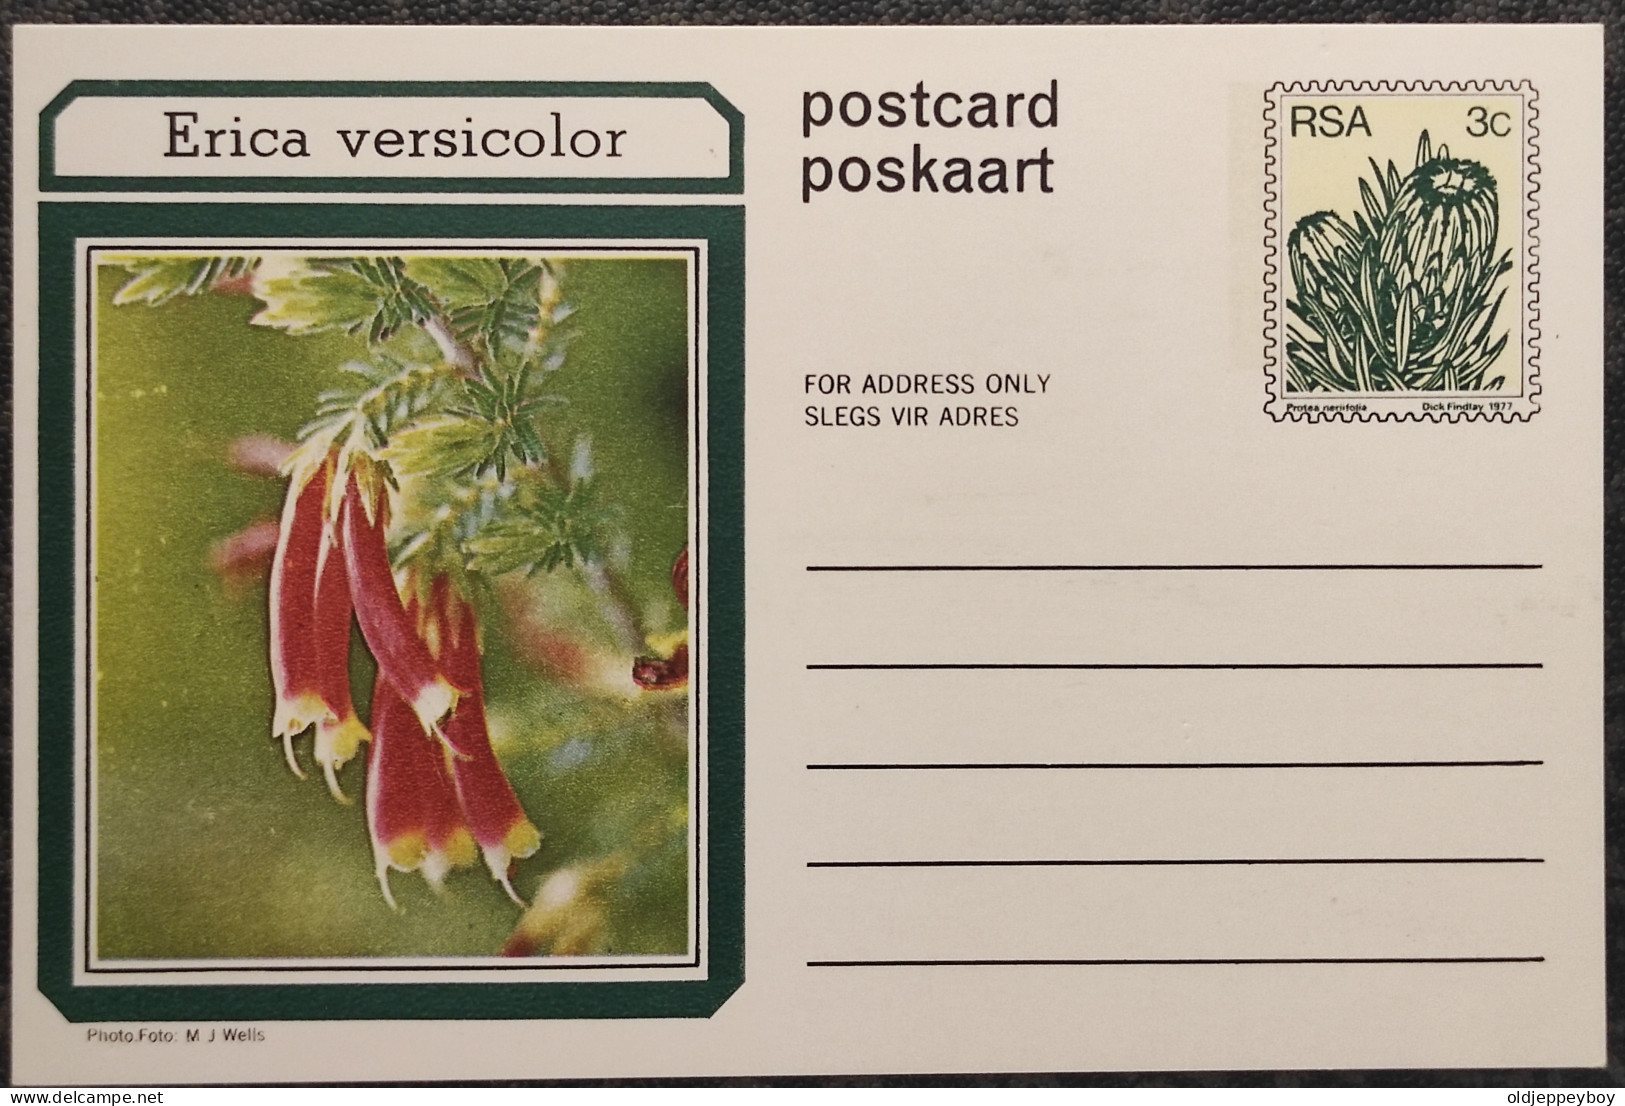 3c SOUTH AFRICA Postal STATIONERY CARD Illus ERICA VERSICOLOR FLOWER Cover Stamps Flowers Rsa - Storia Postale